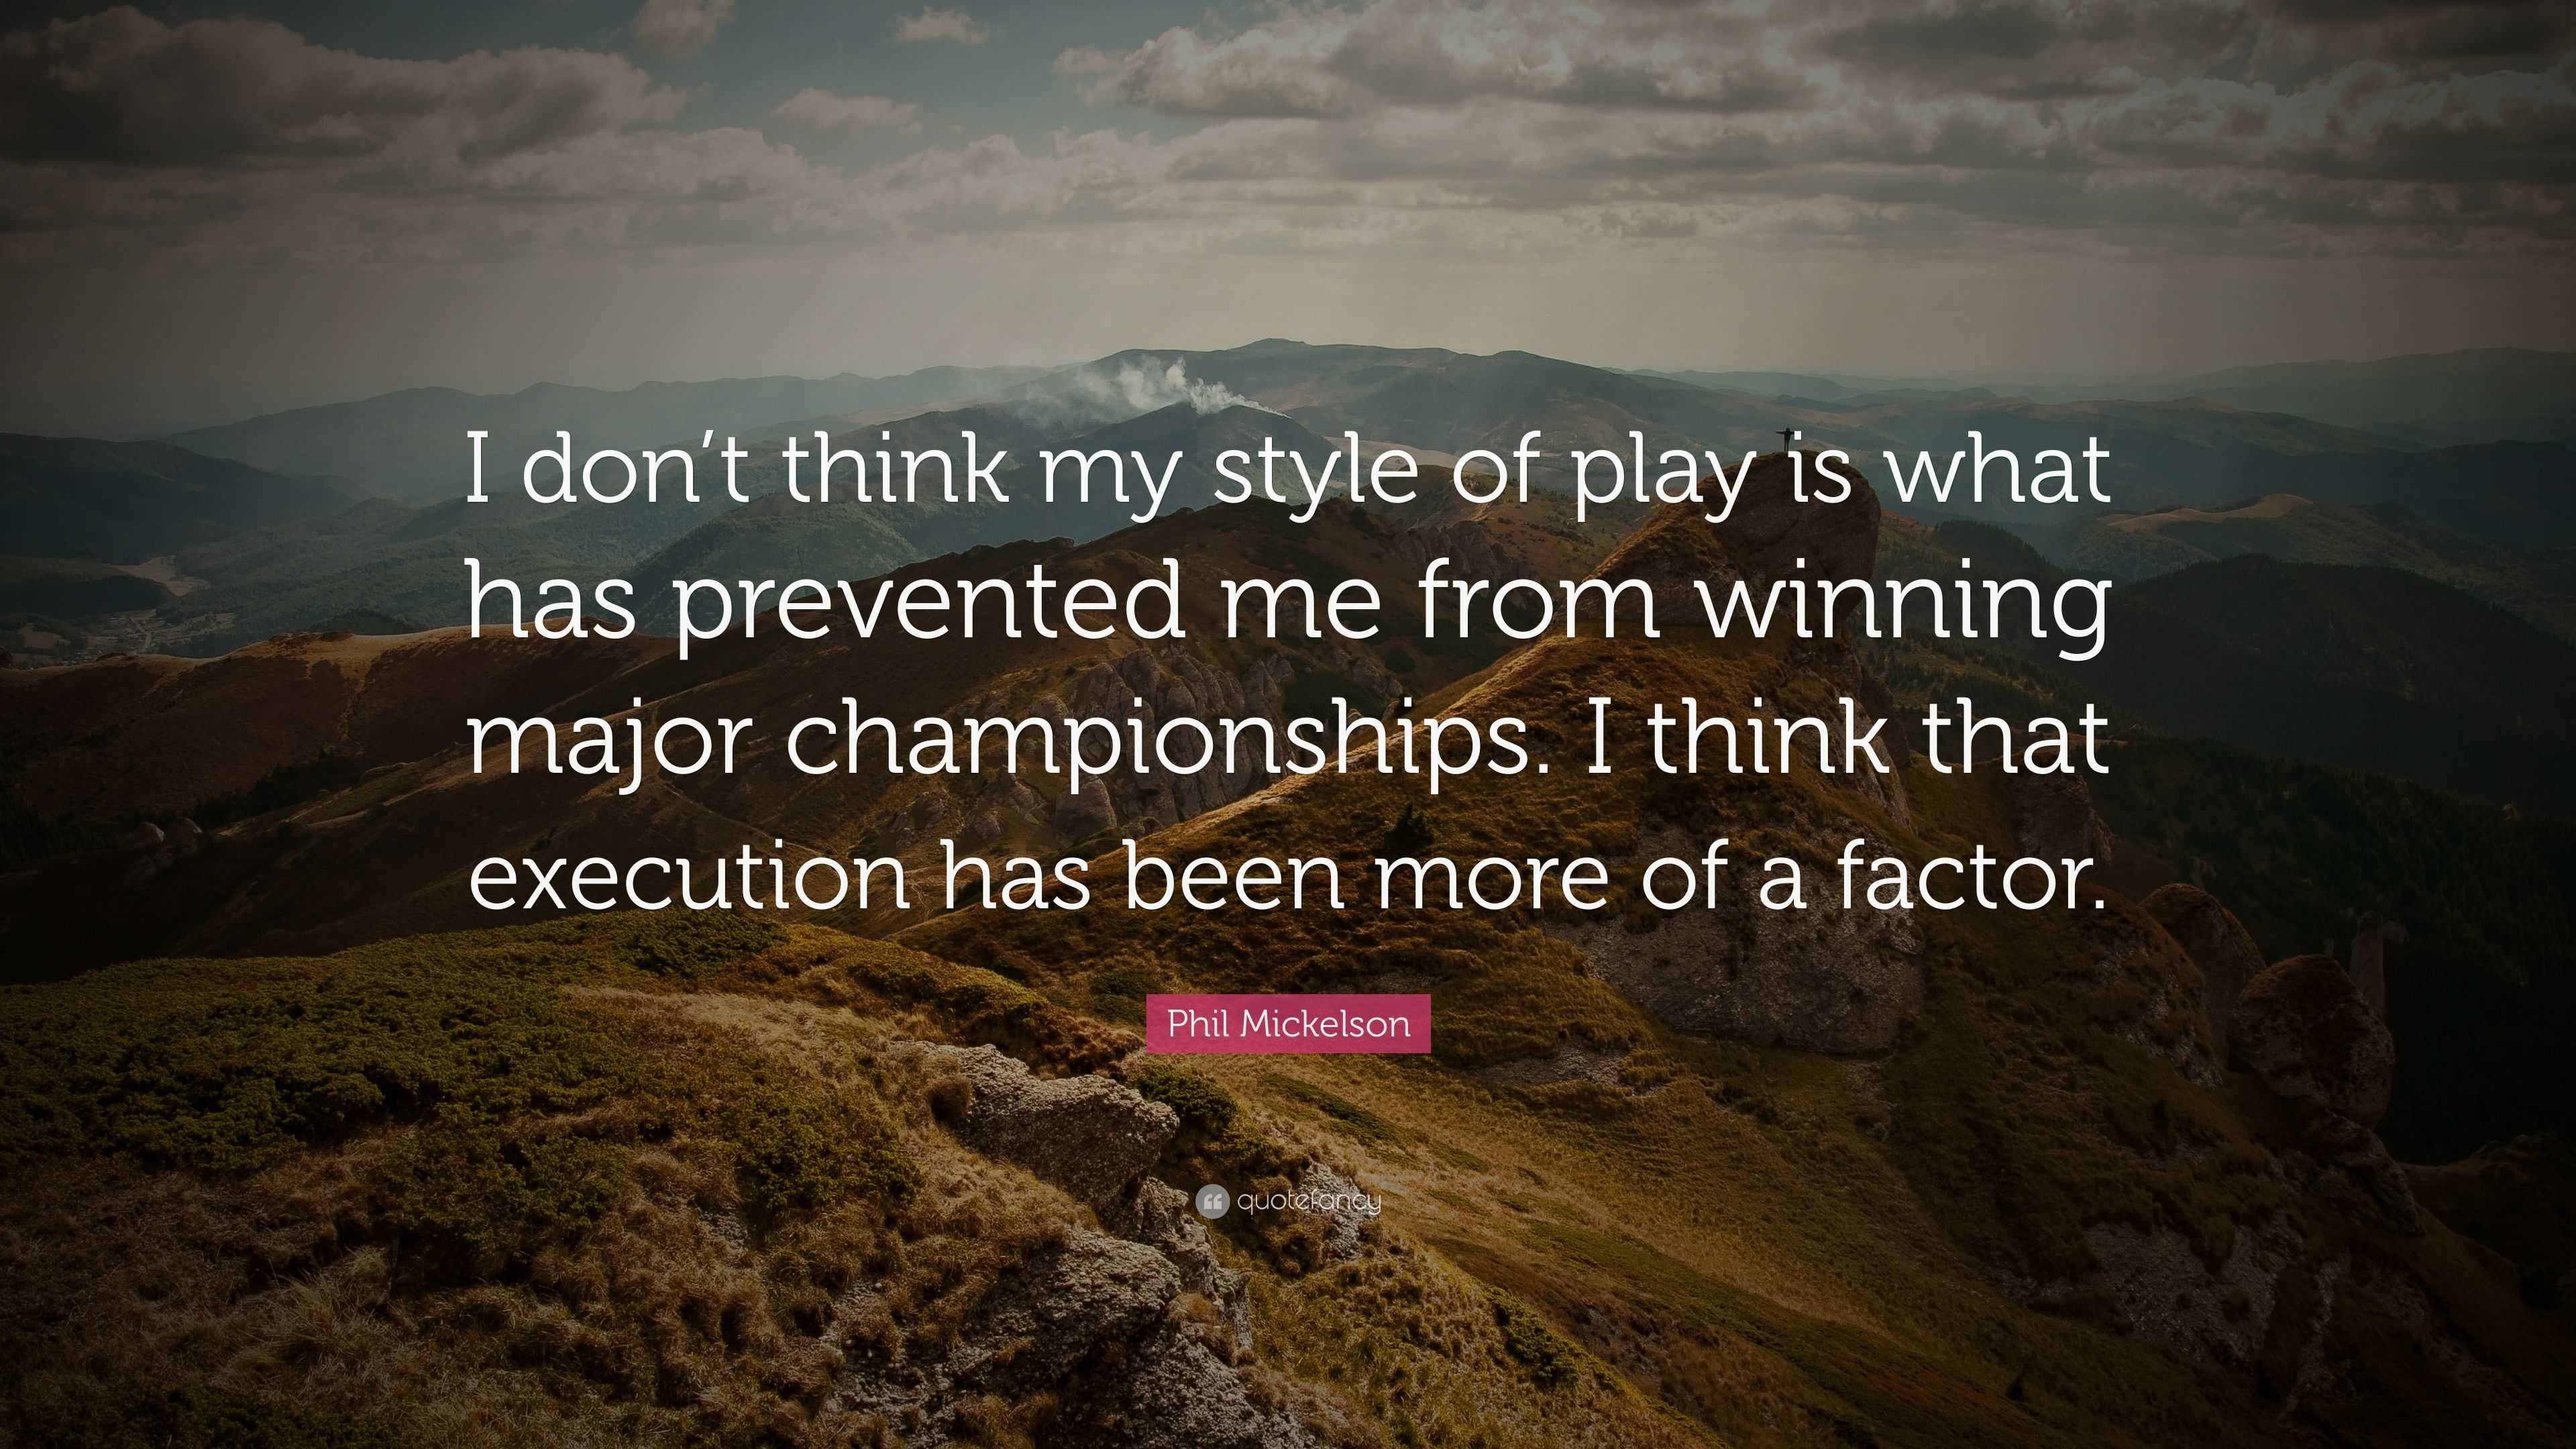 Phil Mickelson Quote: "I don't think my style of play is what has prevented me from winning ...